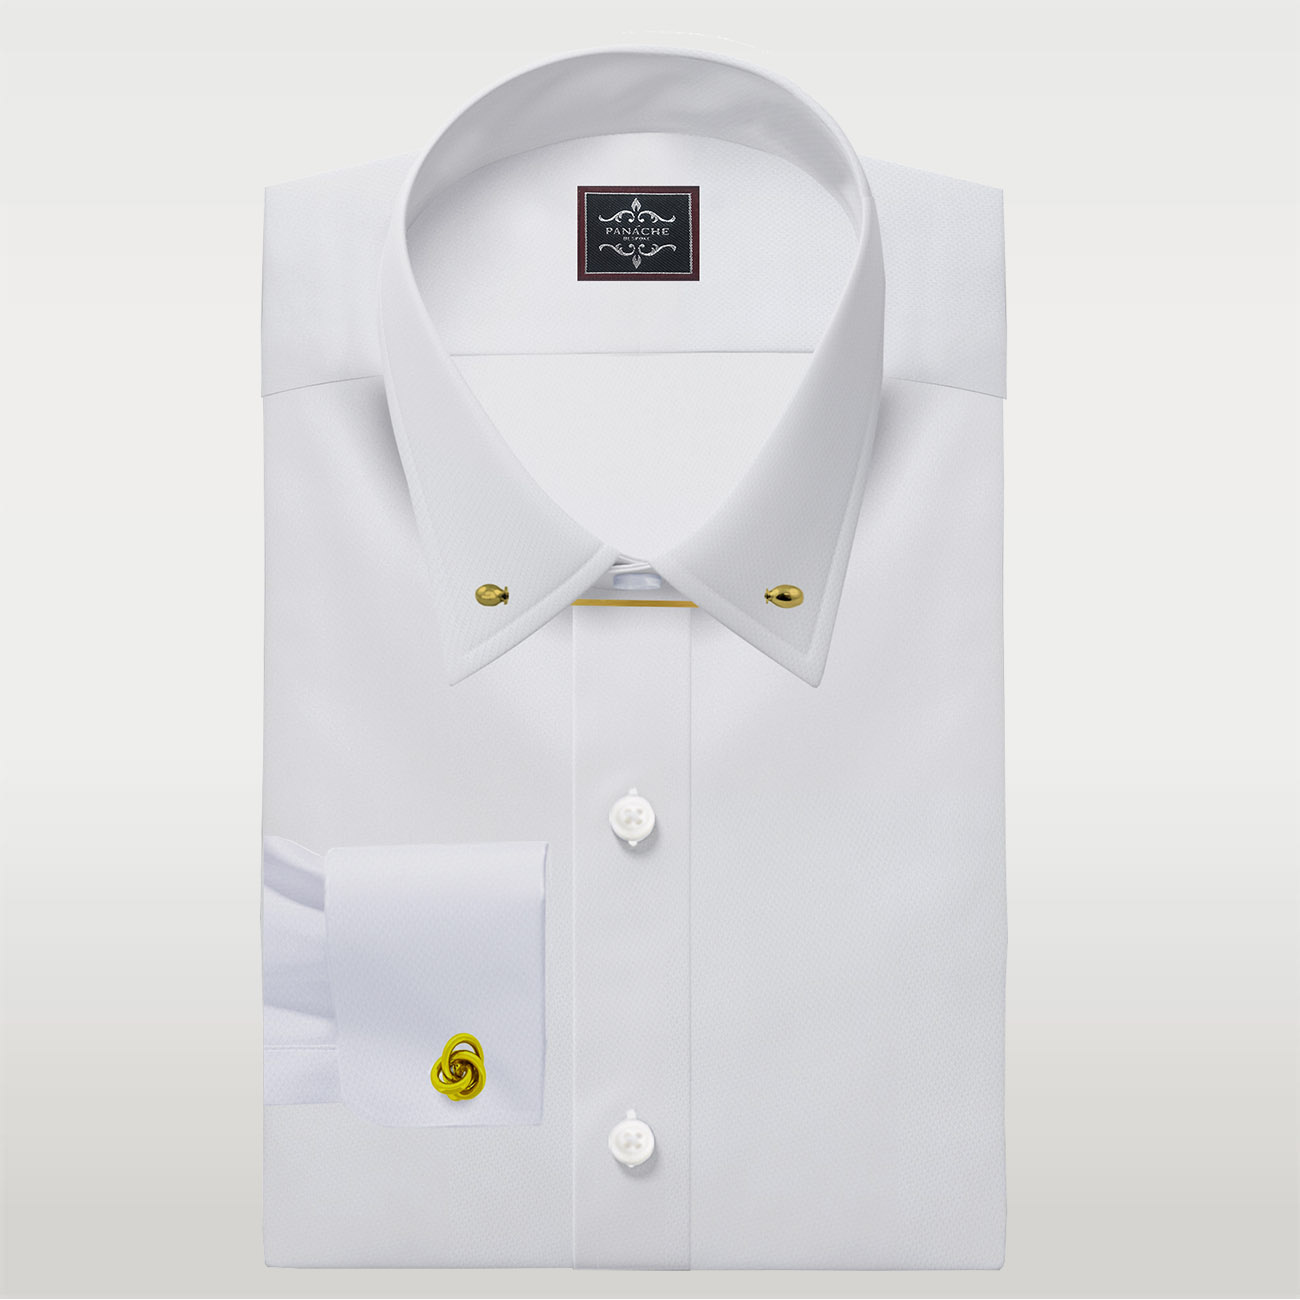 Mens Italian Double Cuff Formal White Shirt Slim Fit Include Metal